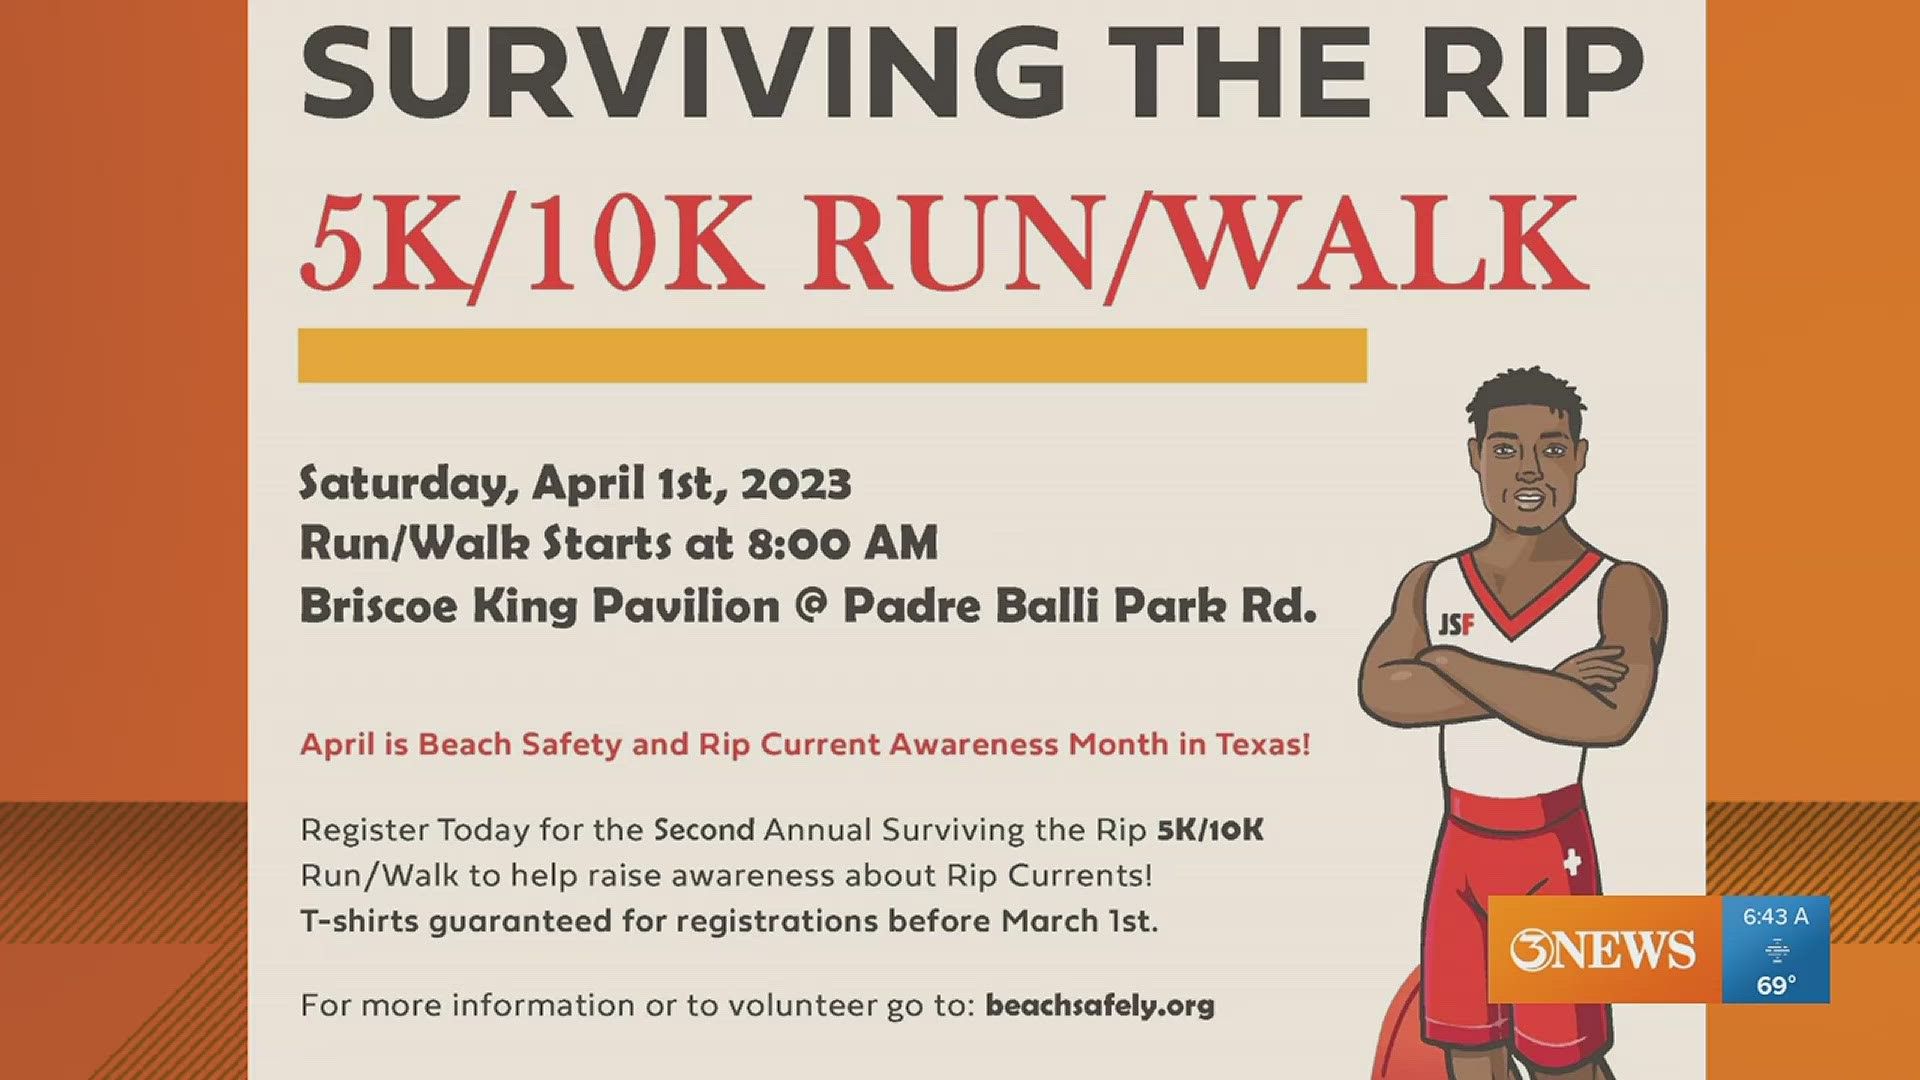 Second Annual Surviving the Rip 5K or 10K Run/Walk to help raise awareness of beach safety and rip current survival